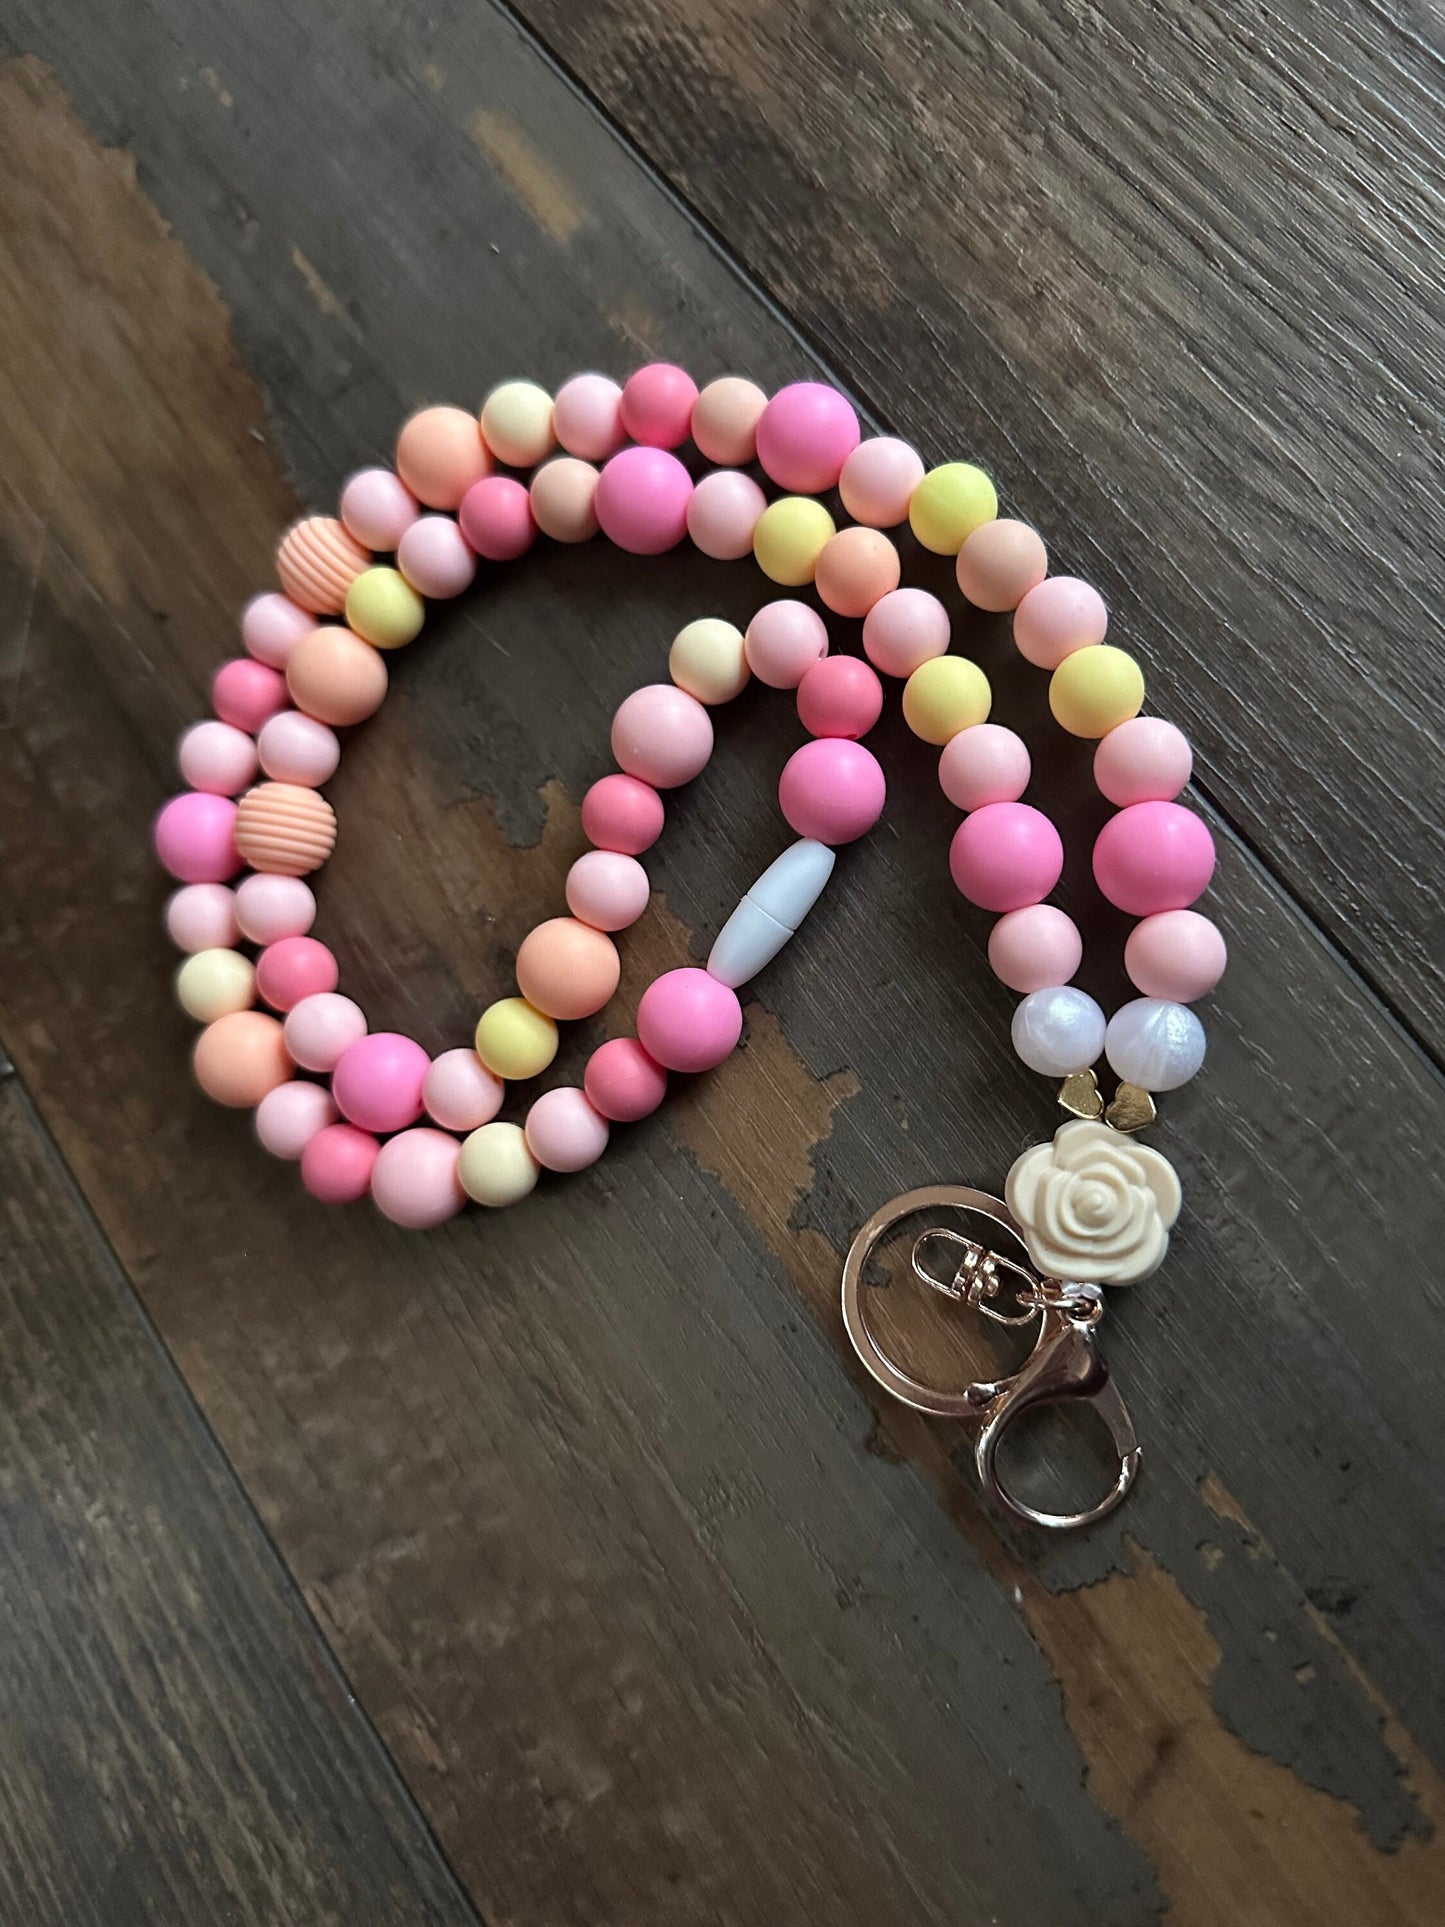 Sunset pattern silicone bead lanyard perfect for teachers and nurses. Great gift for teacher appreciation day! This lanyard is made with a gold lobster clasp and a breakaway Closure. There’s a large rose pendant bead by the clasp.